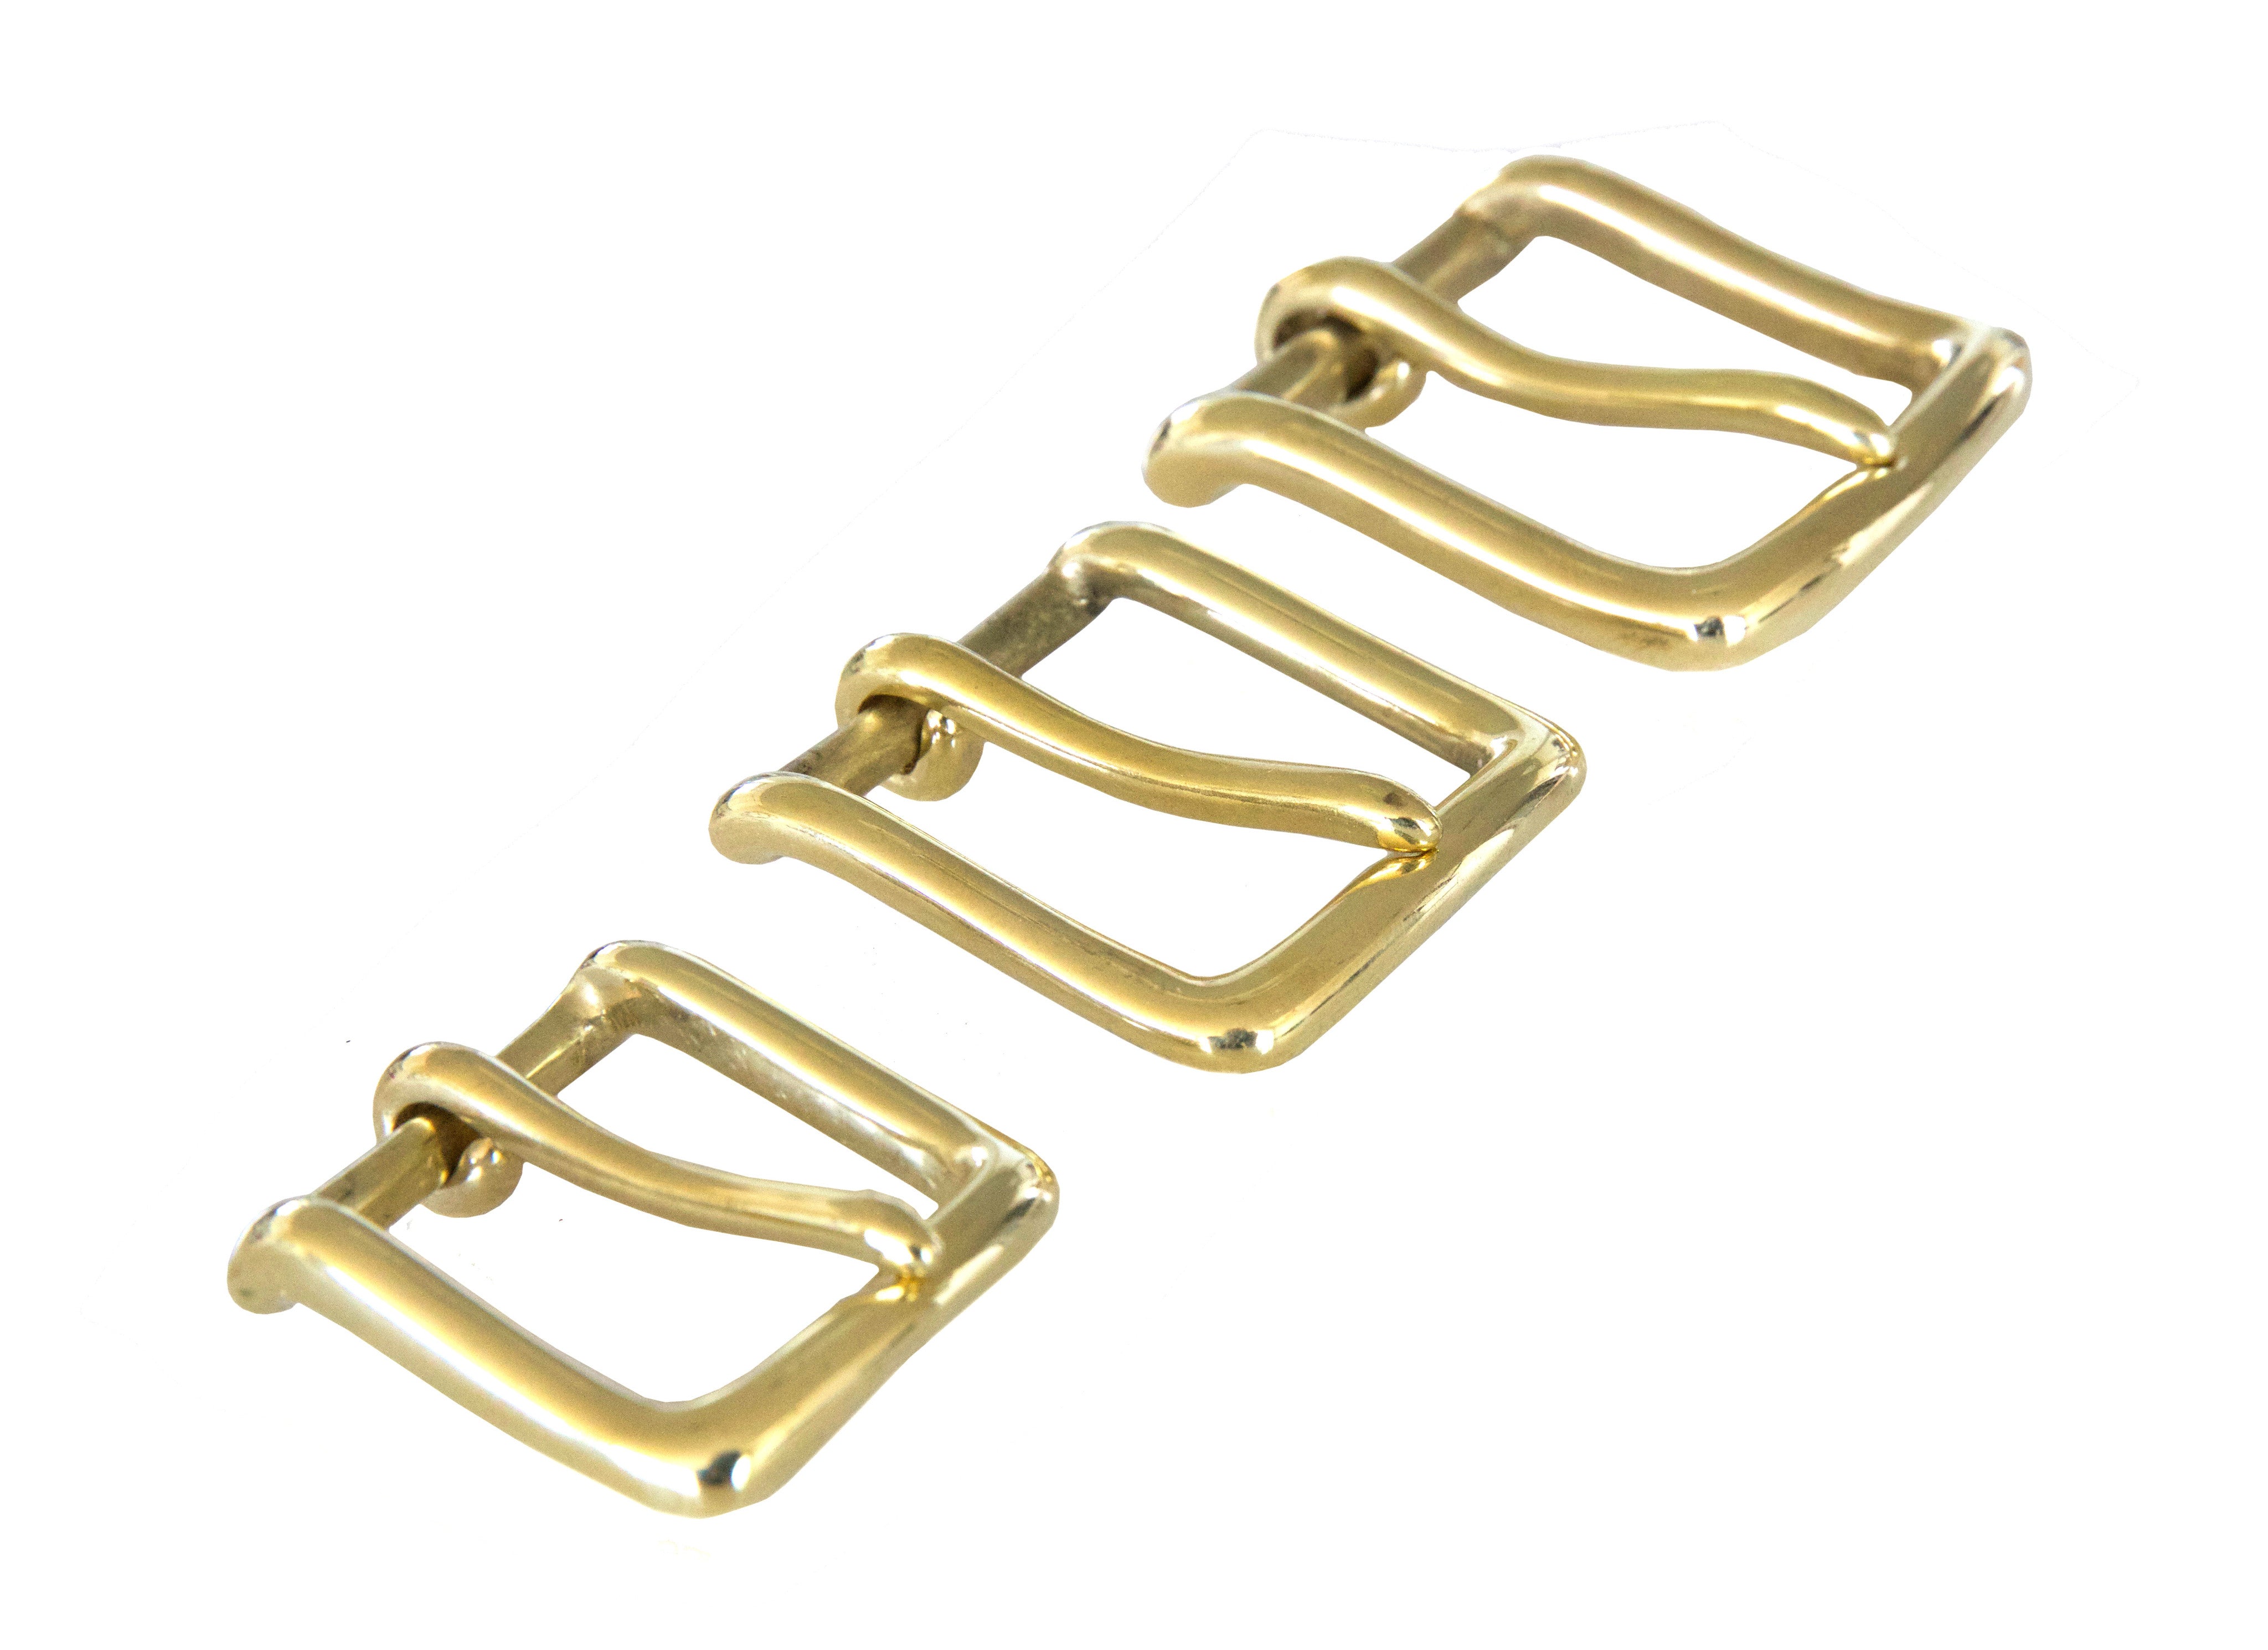 Solid Brass Belt Buckle 32 mm - Chrome Plated